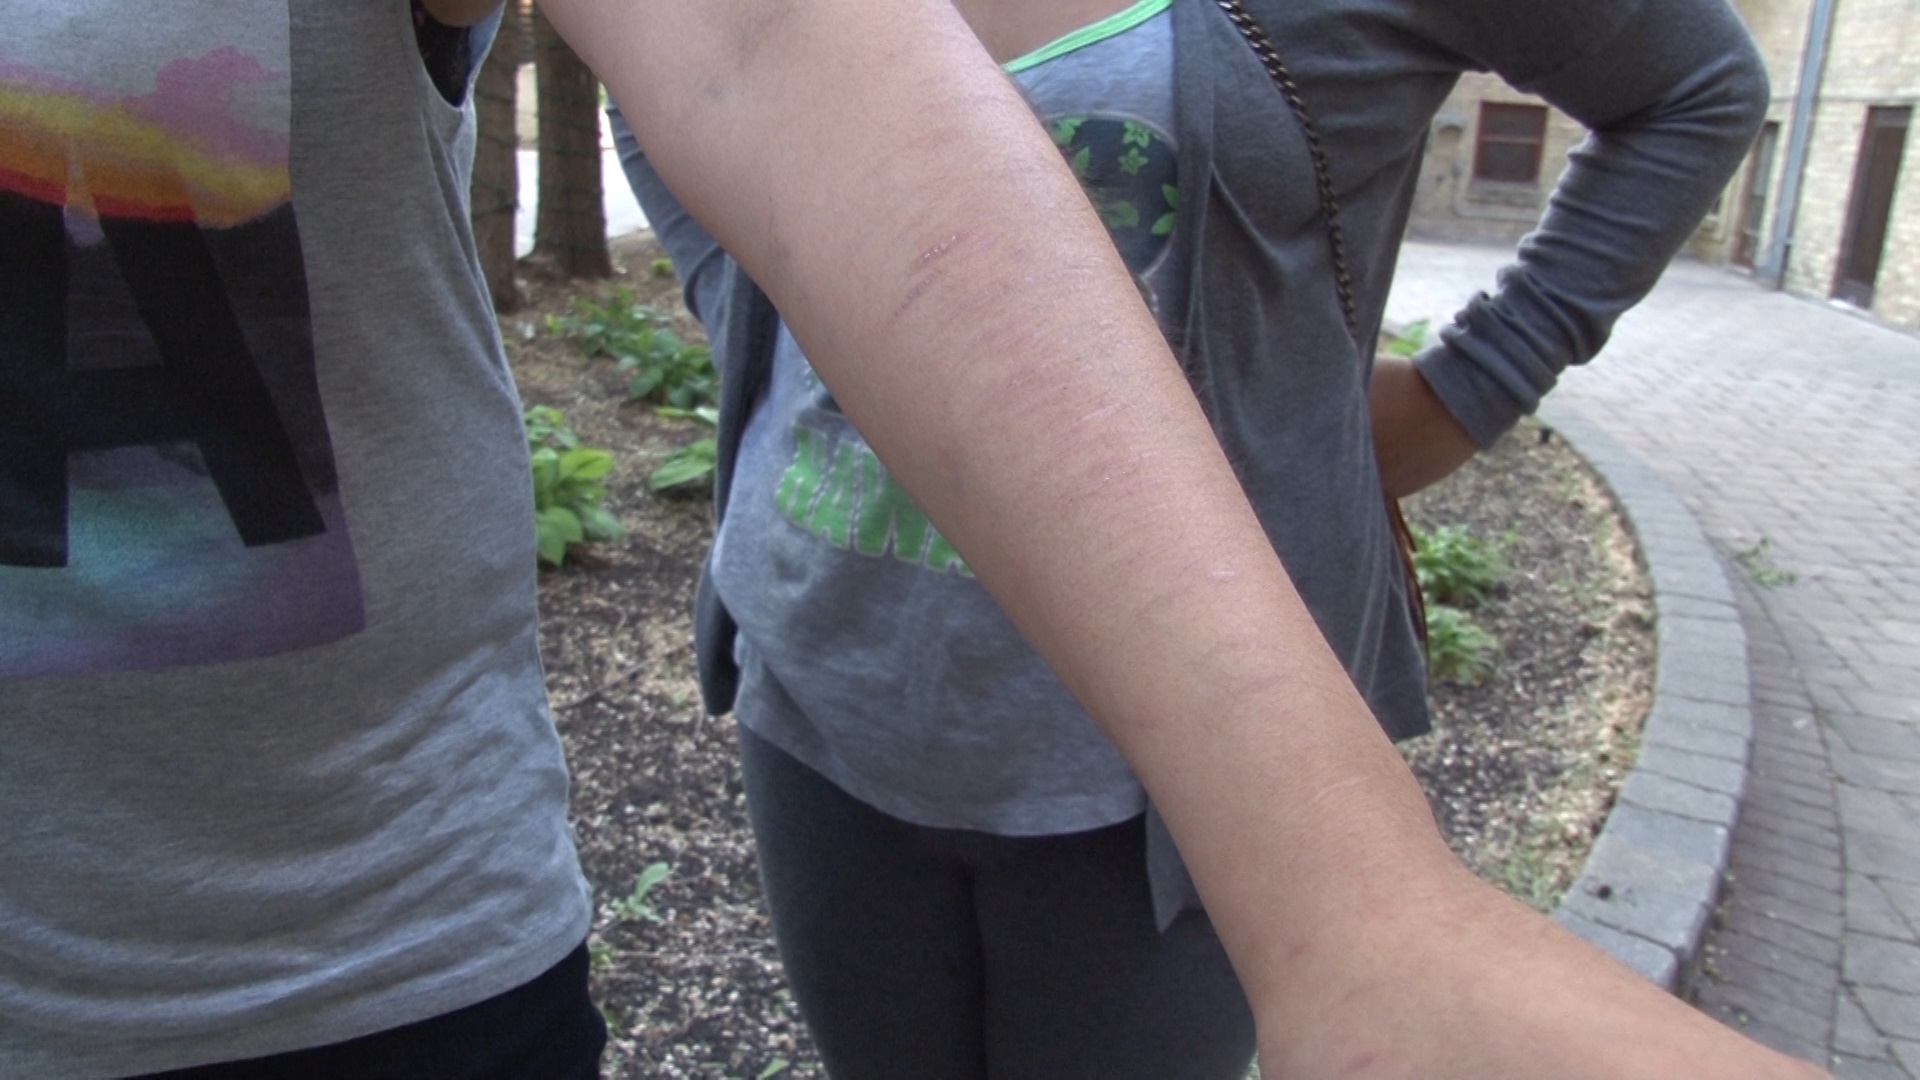 Jennifer shows self-inflicted scars on her arm where she cuts herself. The CFS ward says she's suicidal and blames the Manitoba government. 